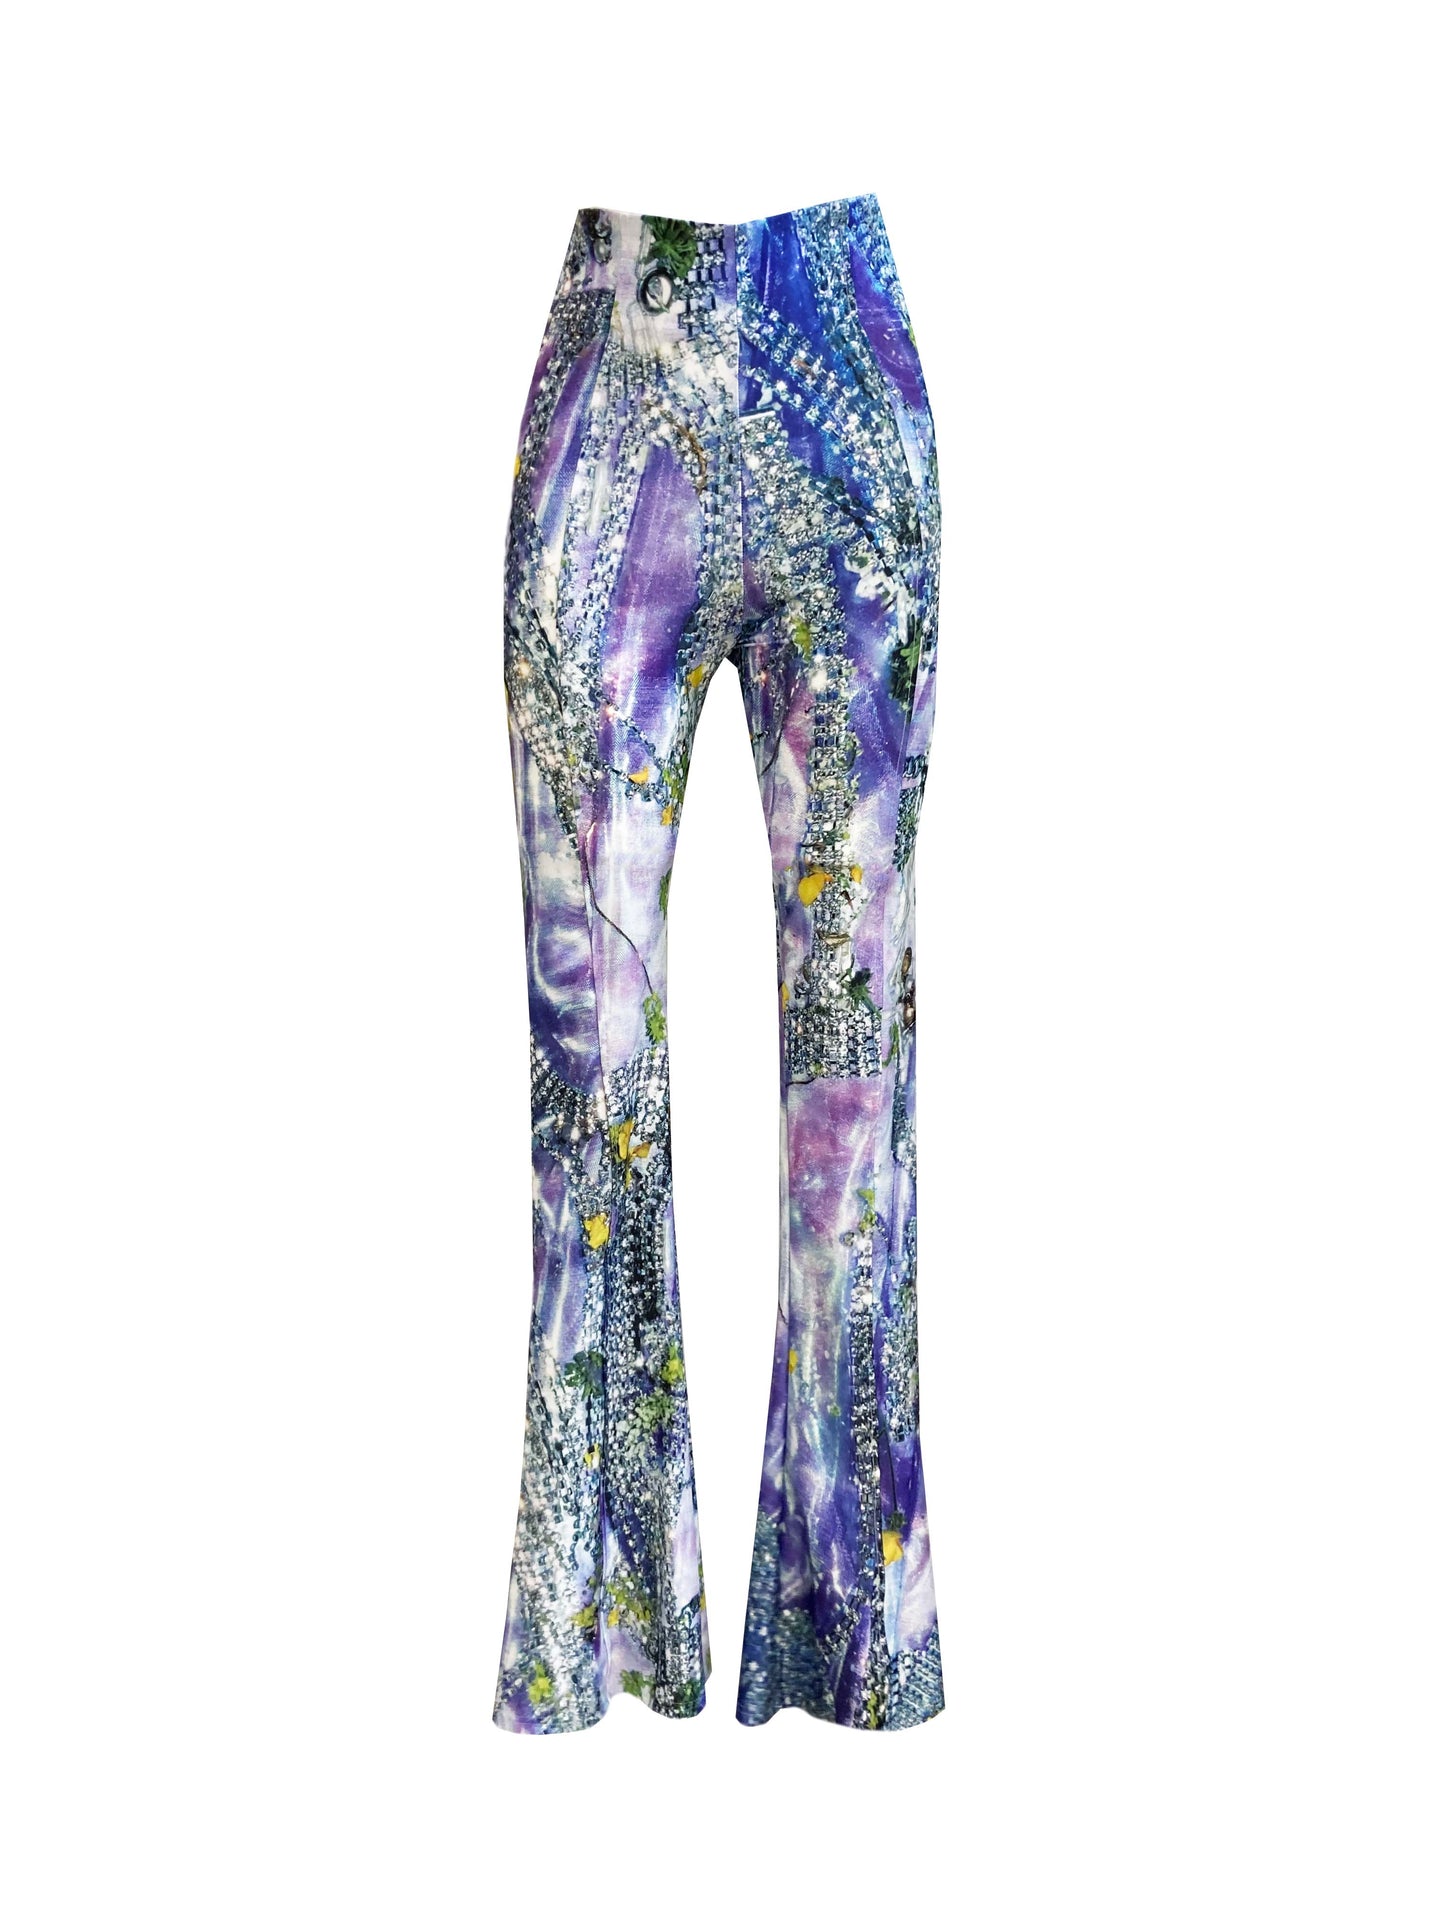 The In Bloom Trousers